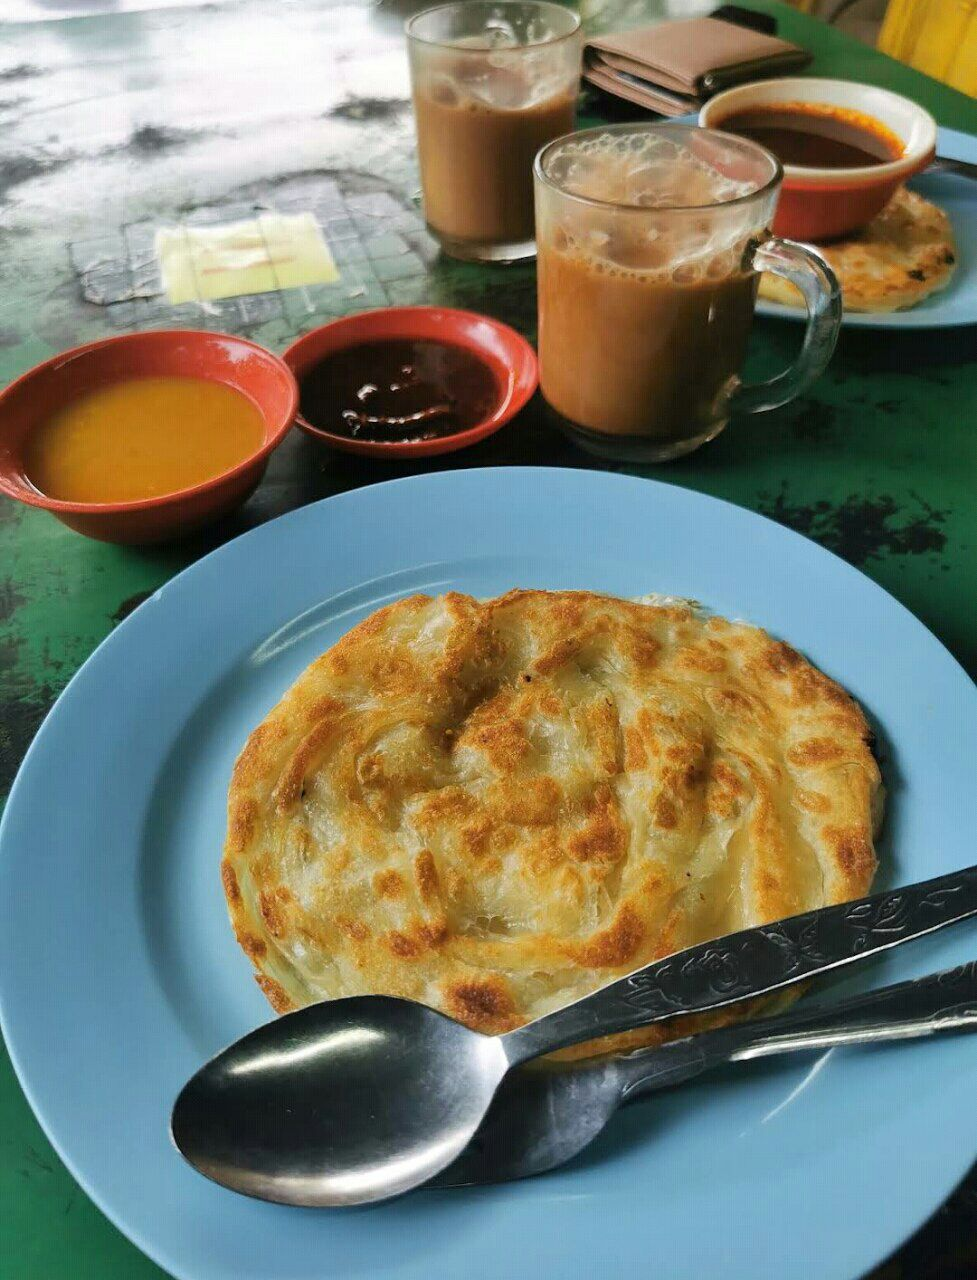 50 sen roti canai for 21 years and ever after